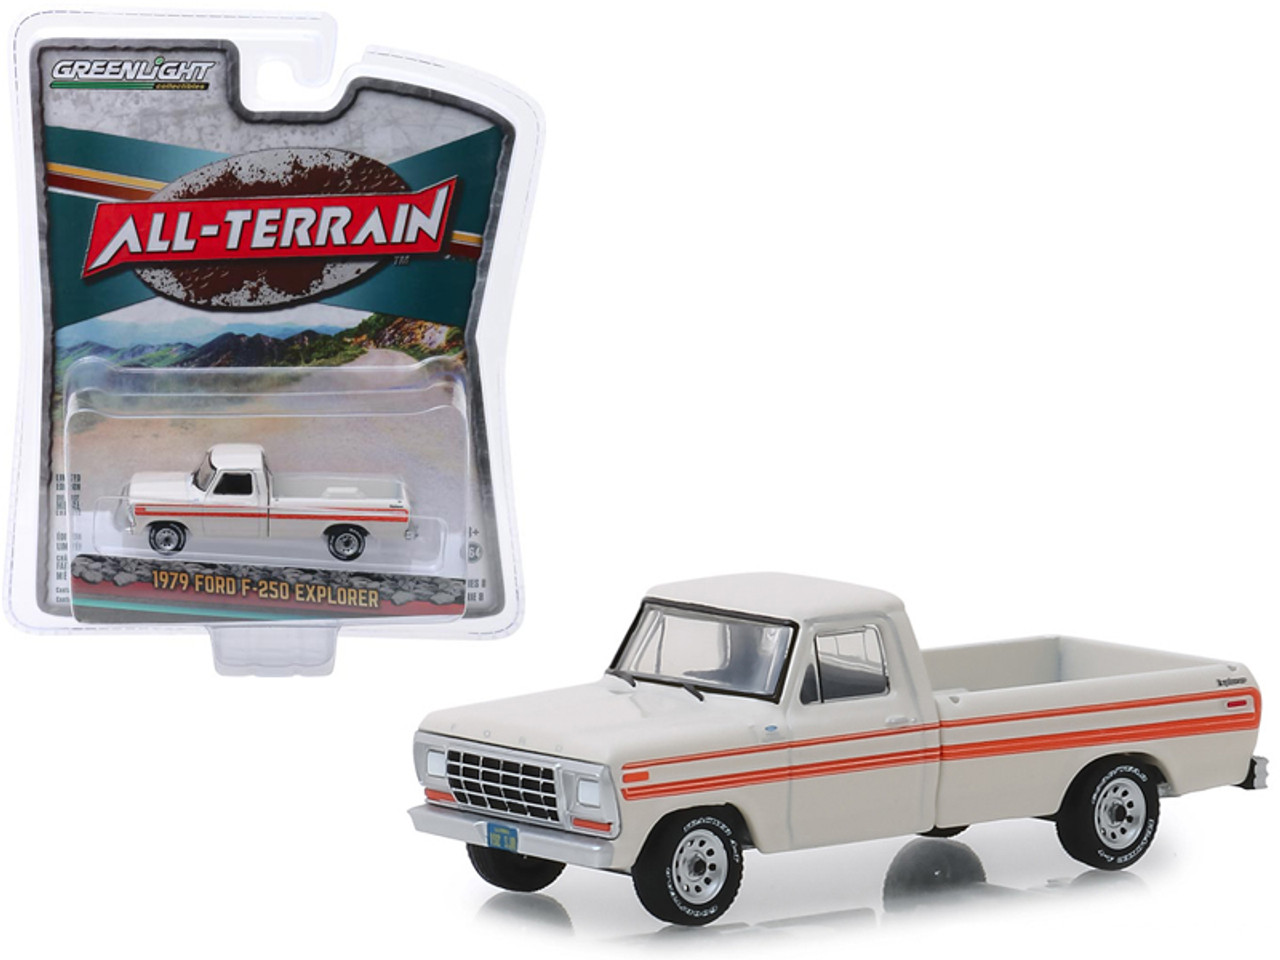 1979 Ford F-250 Explorer Pickup Truck Cream with Orange Stripes "All Terrain" Series 8 1/64 Diecast Model Car by Greenlight